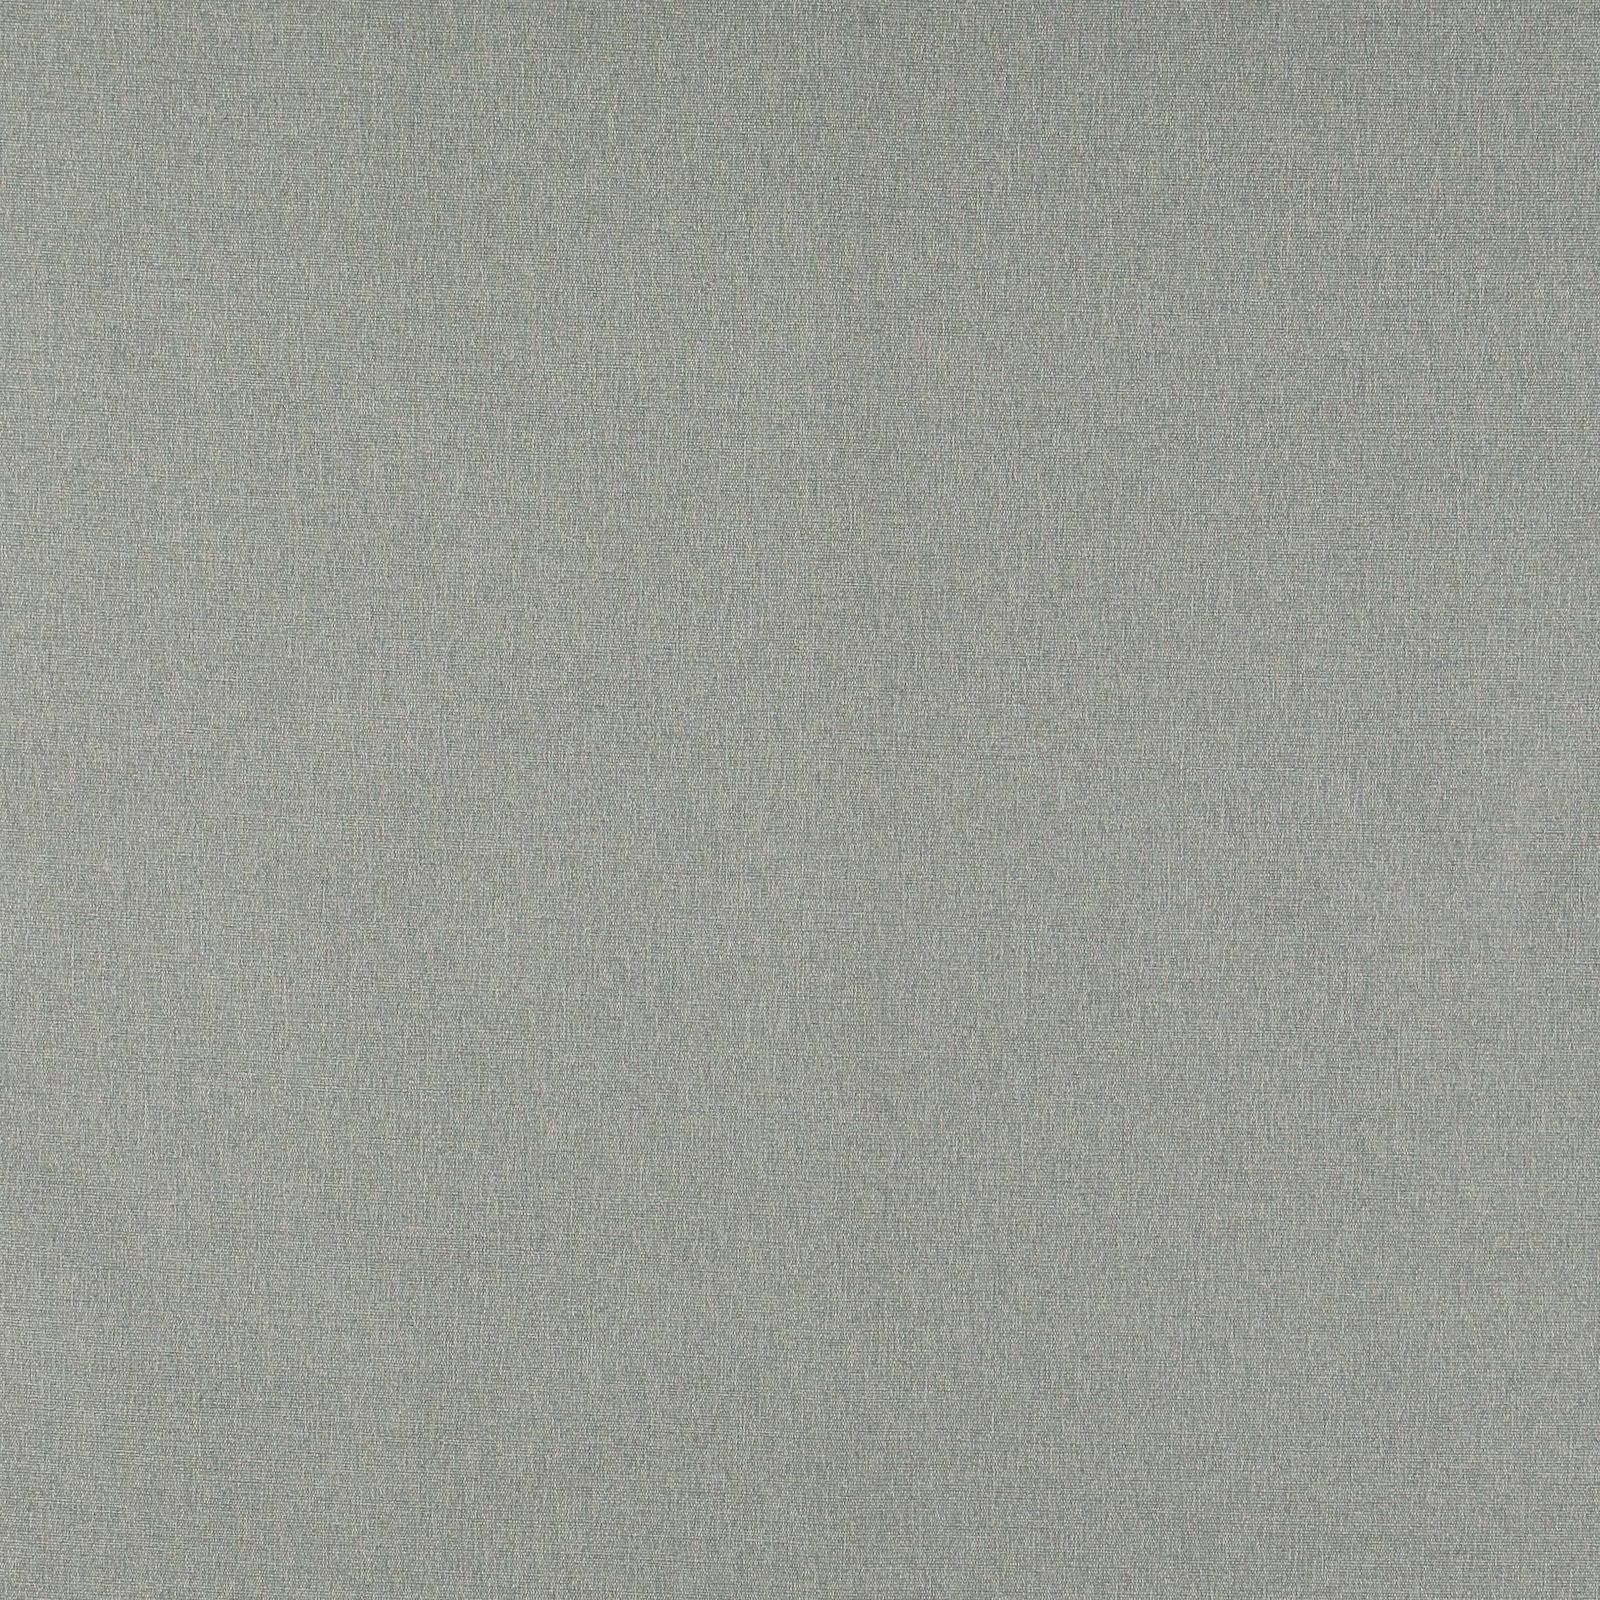 Upholstery fabric grey w/white backing 824091_pack_sp